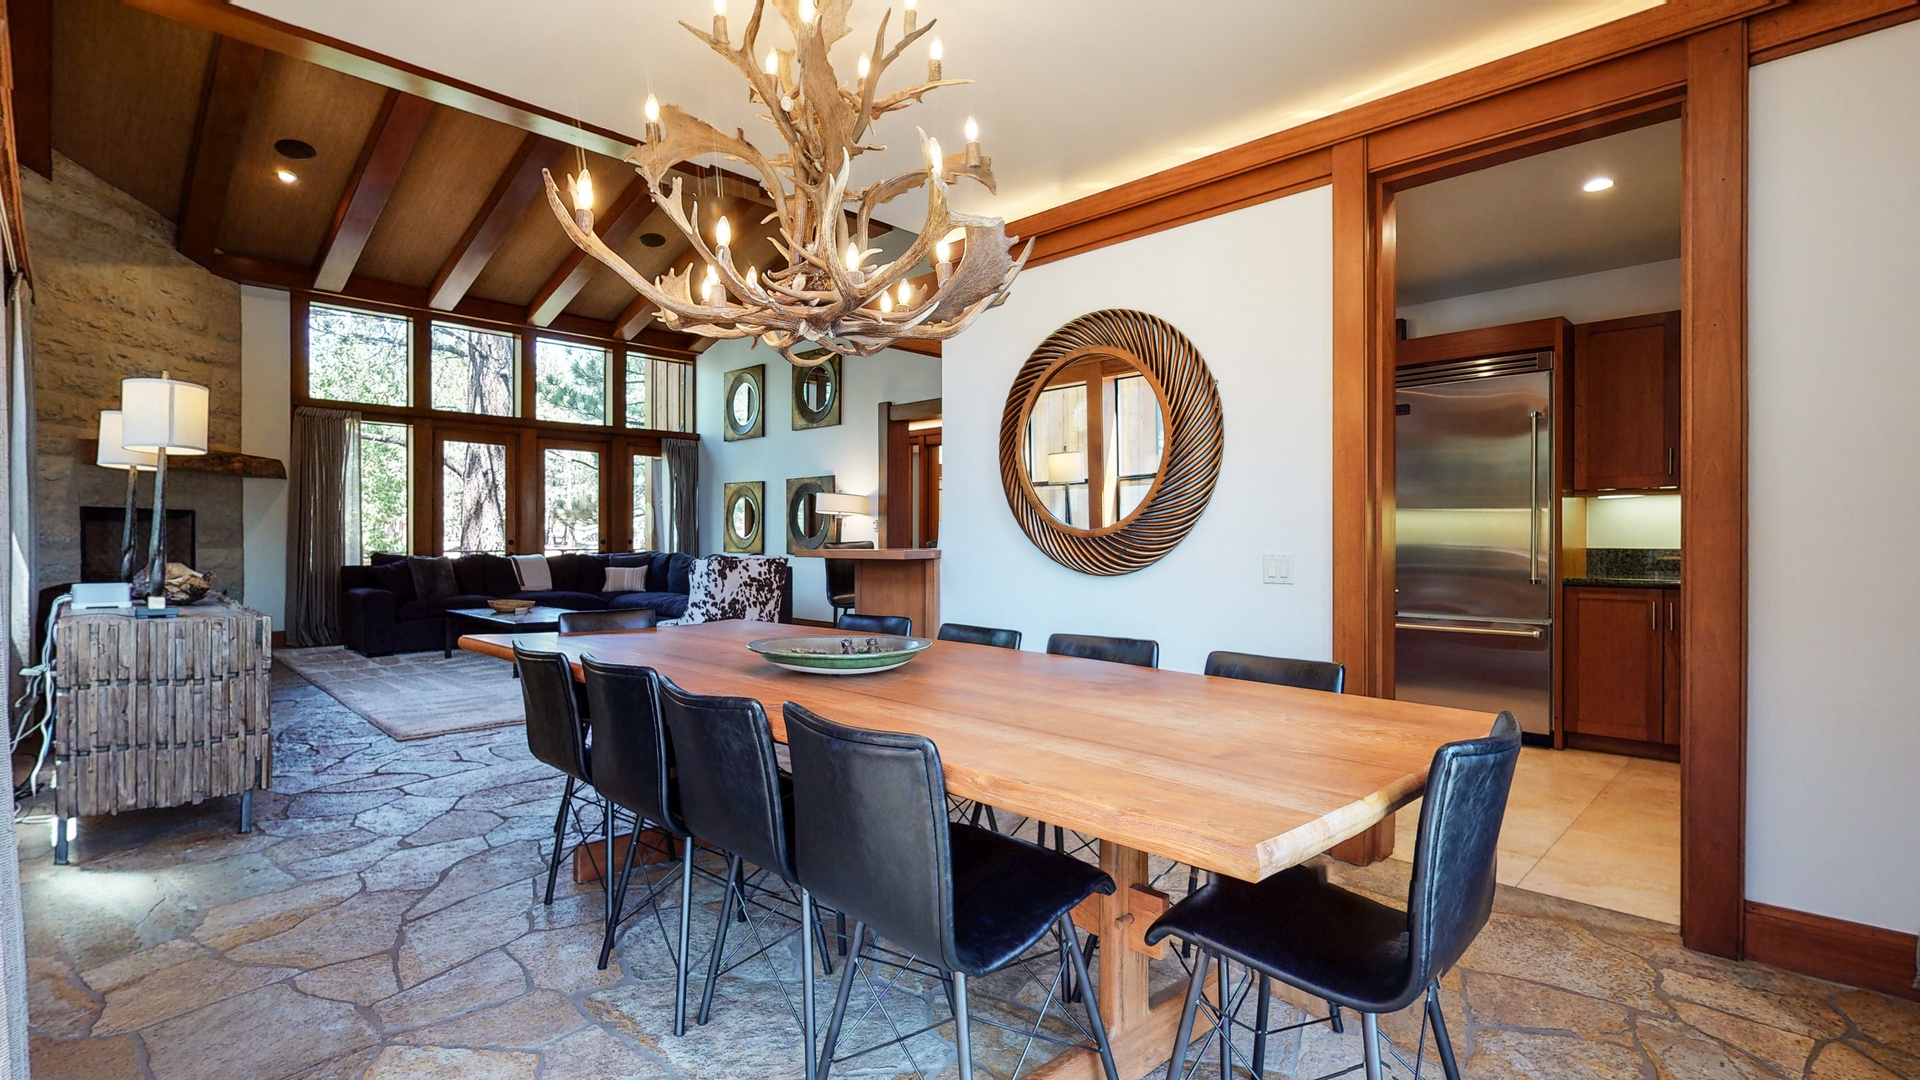 Spacious dining room table fit for 10